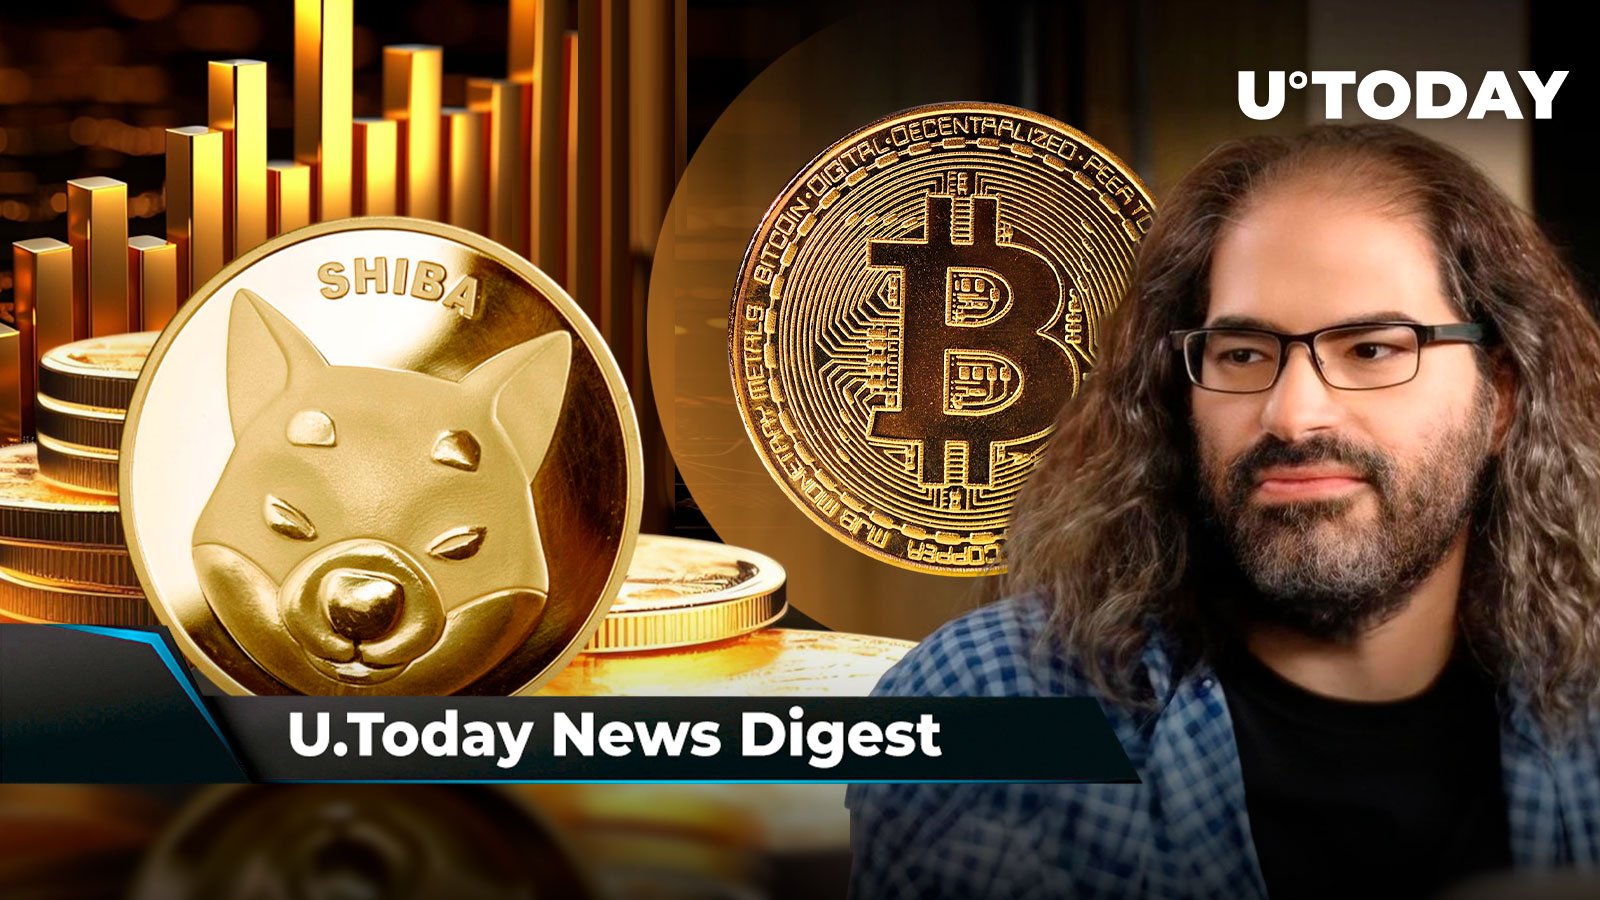 SHIB Secures Second Spot in MarketVector’s Meme Coin Index, Ripple CTO Breaks Silence as to Whether He Is Satoshi: Crypto News Digest by U.Today